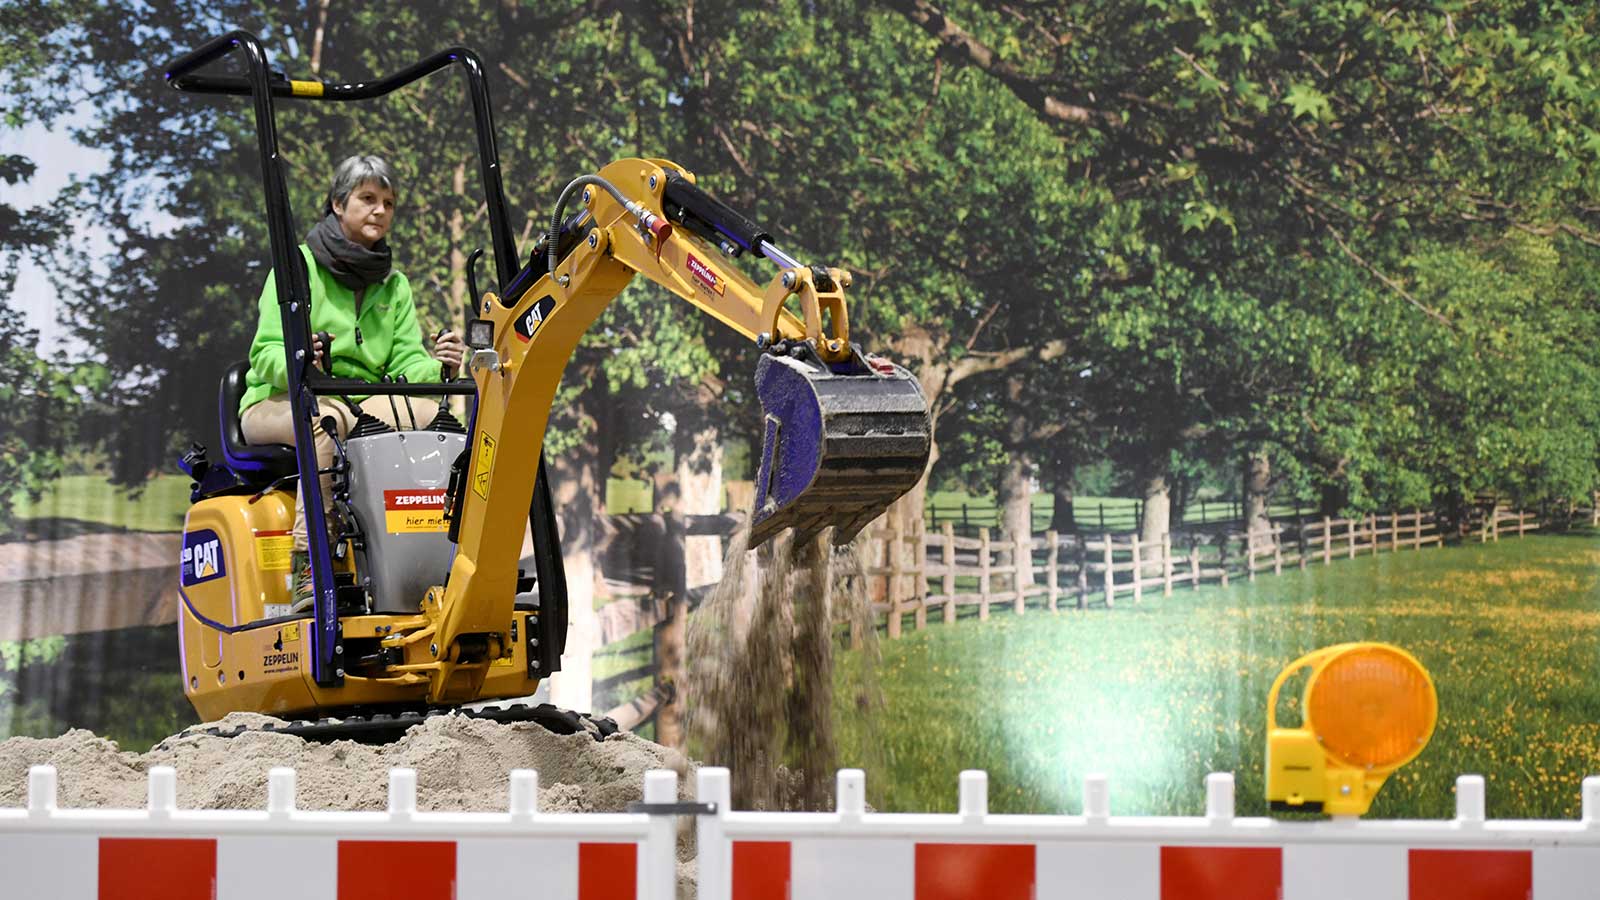 A female visitor on an excavator at the Messer home2 trade show in the Hamburg exhibition halls